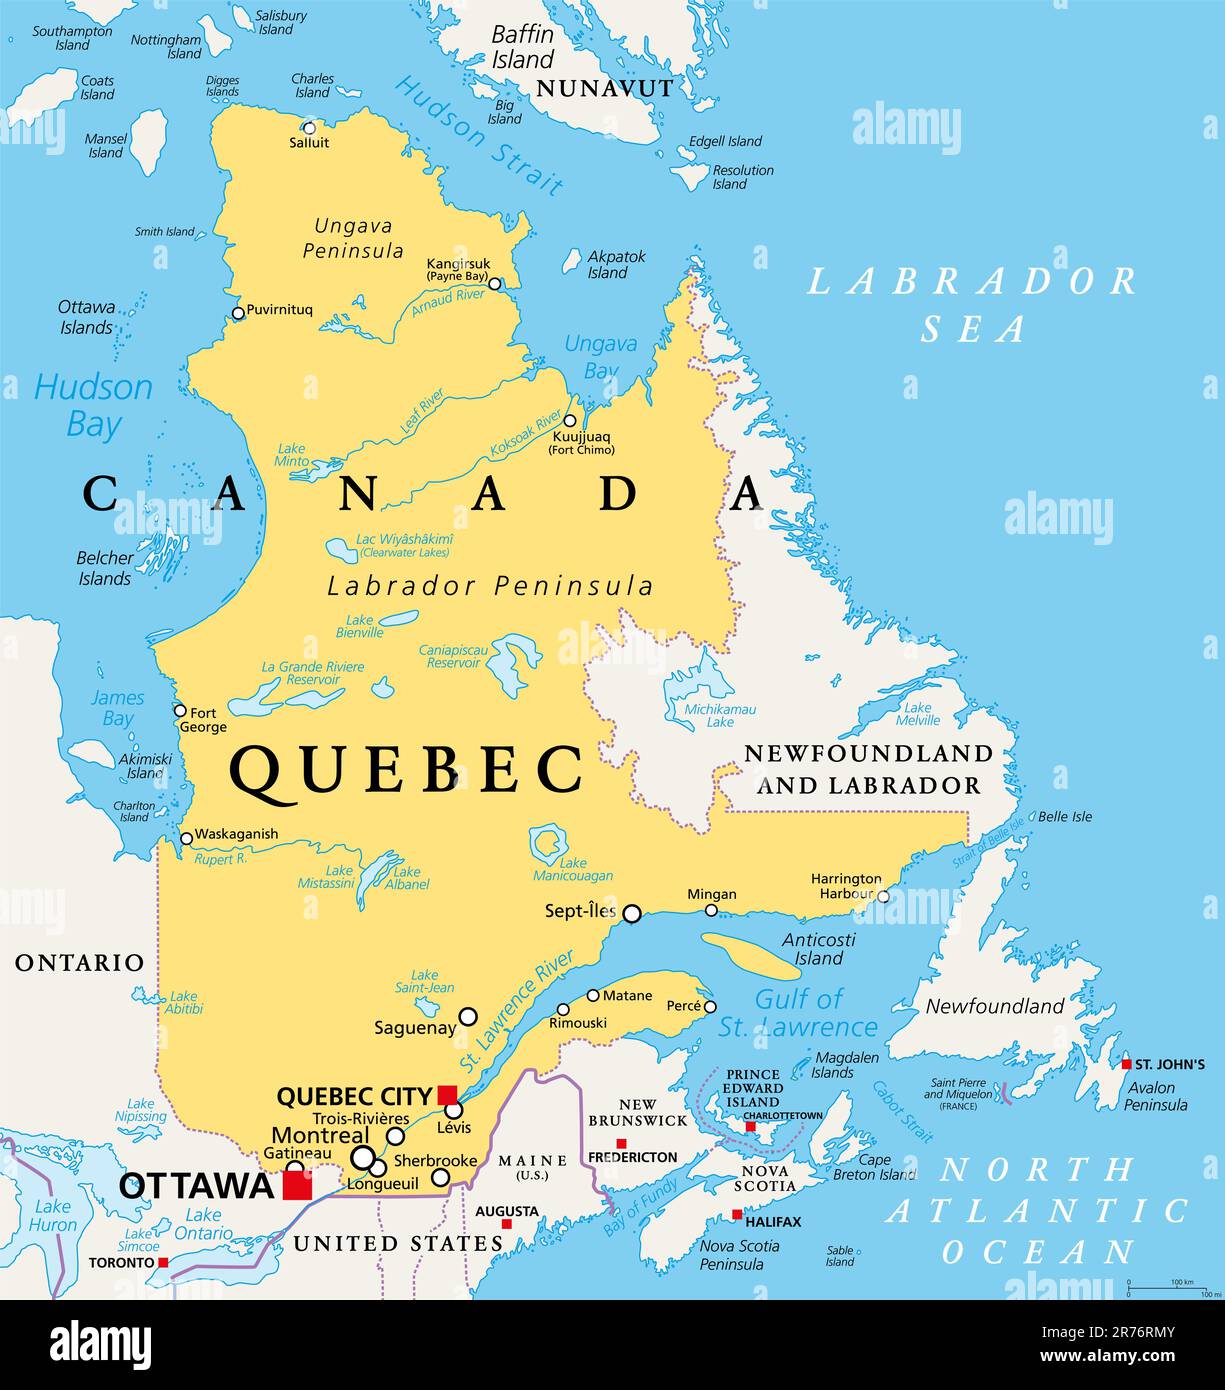 Quebec Largest Province In The Eastern Part Of Canada Political Map Largest Province Located In Central Canada With Capital Quebec City 2R76RMY 